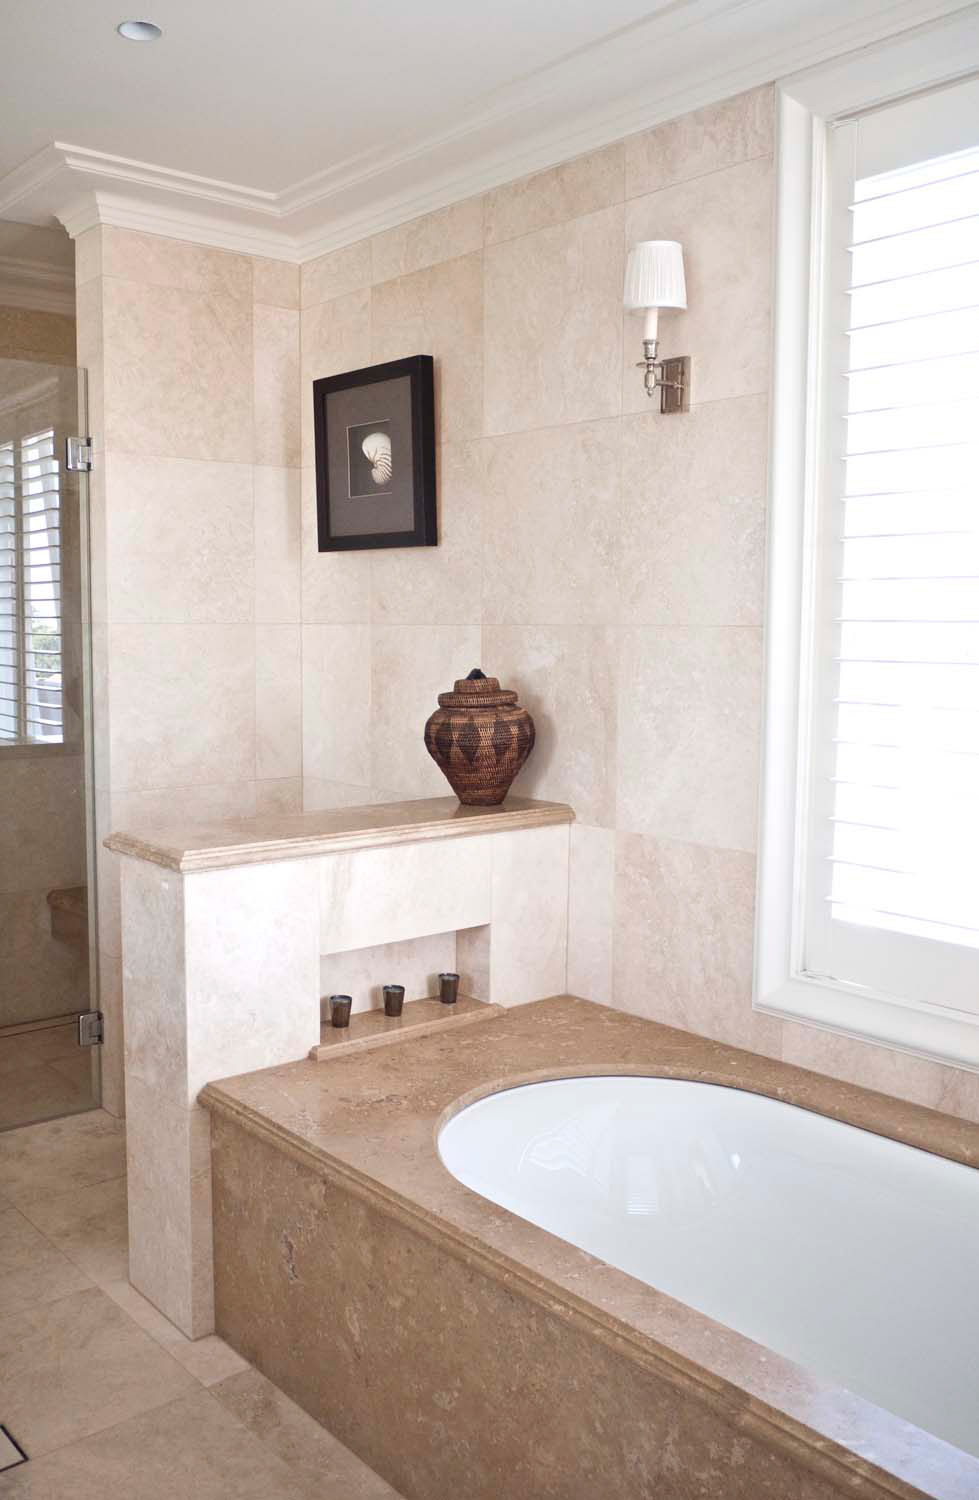 2 Marble bathroom design with wall light, print and décor in french style